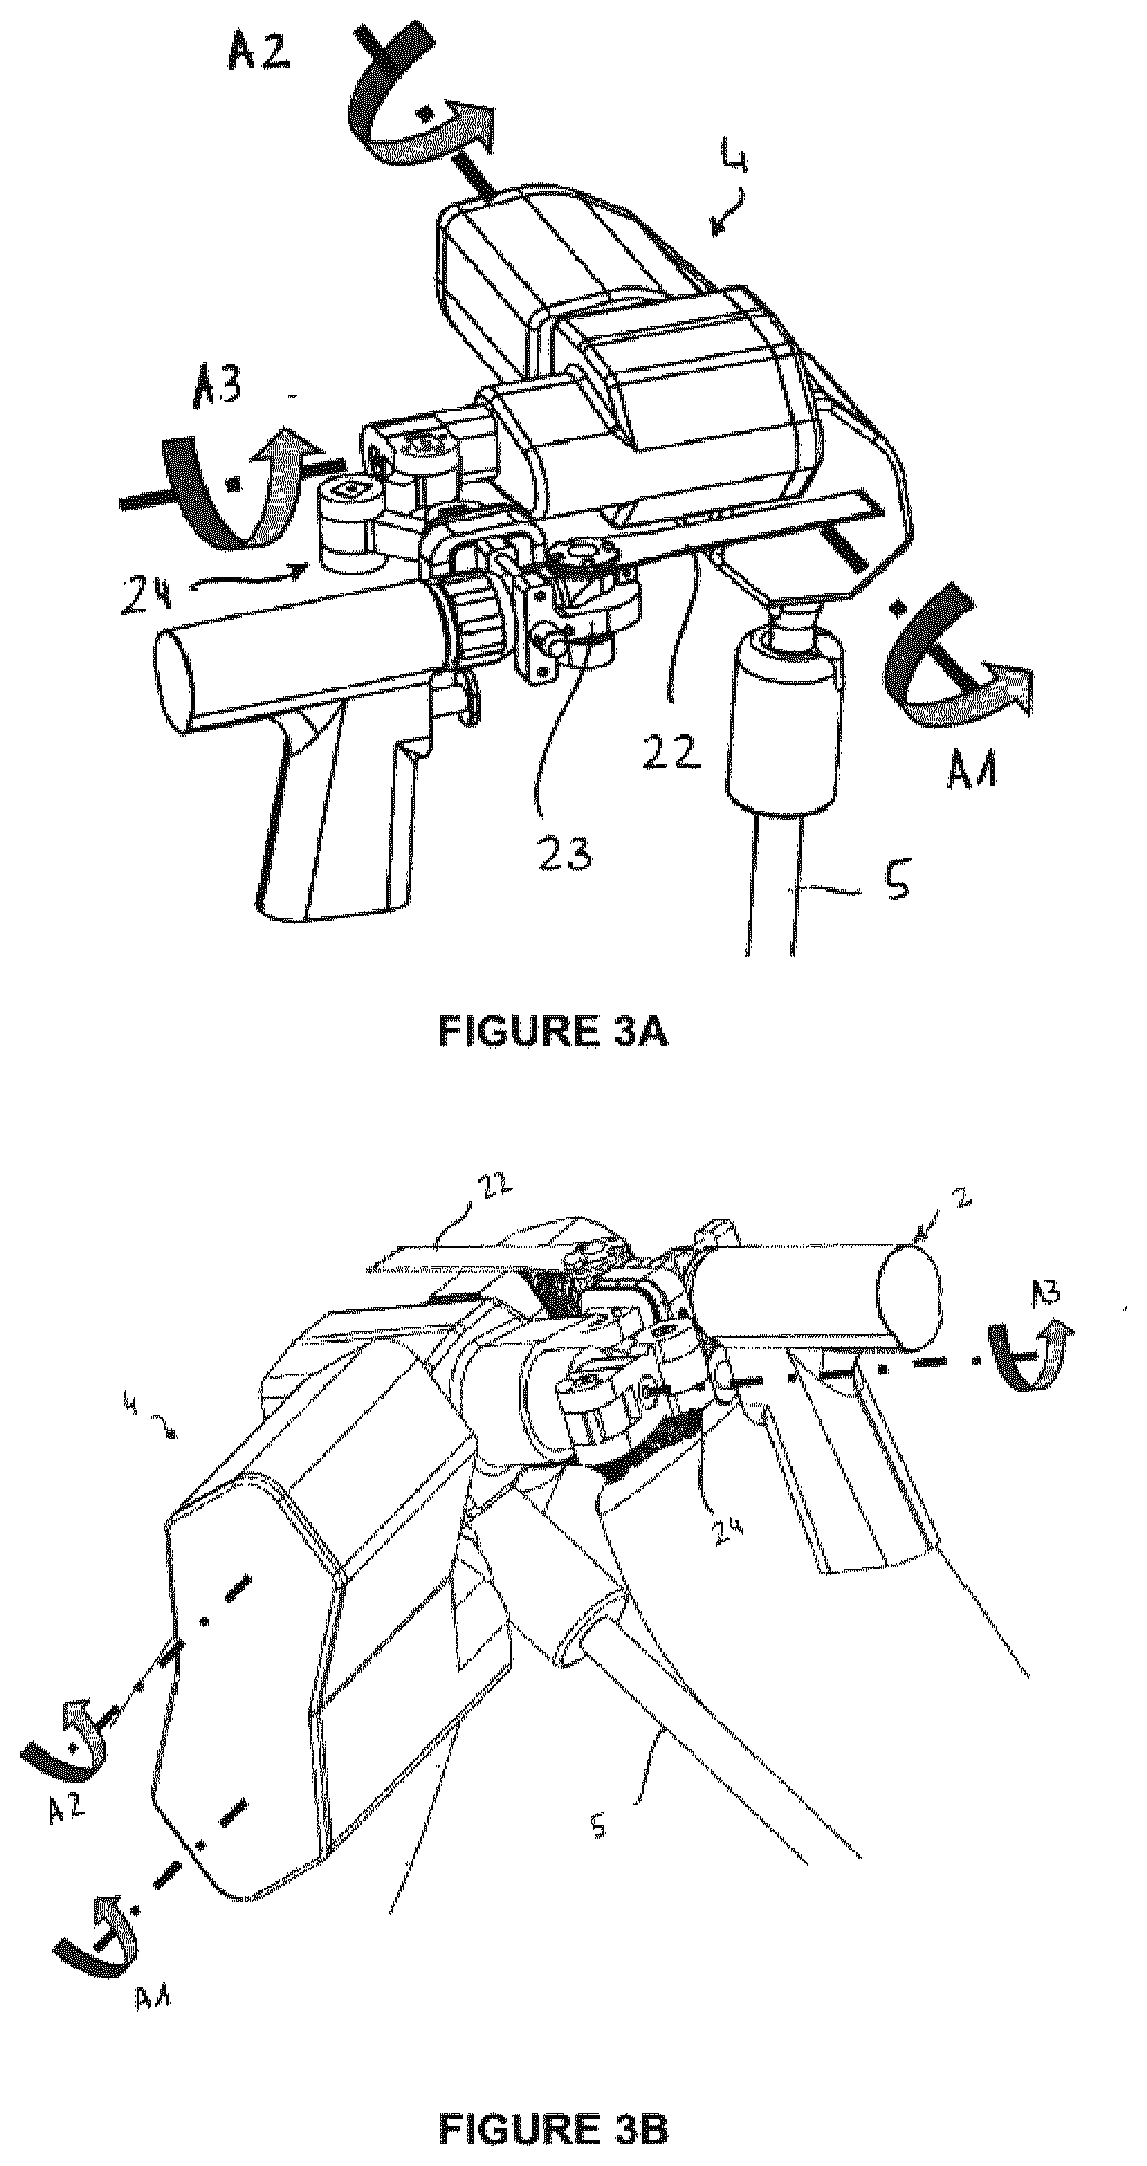 Surgical system for cutting an anatomical structure according to at least one target plane